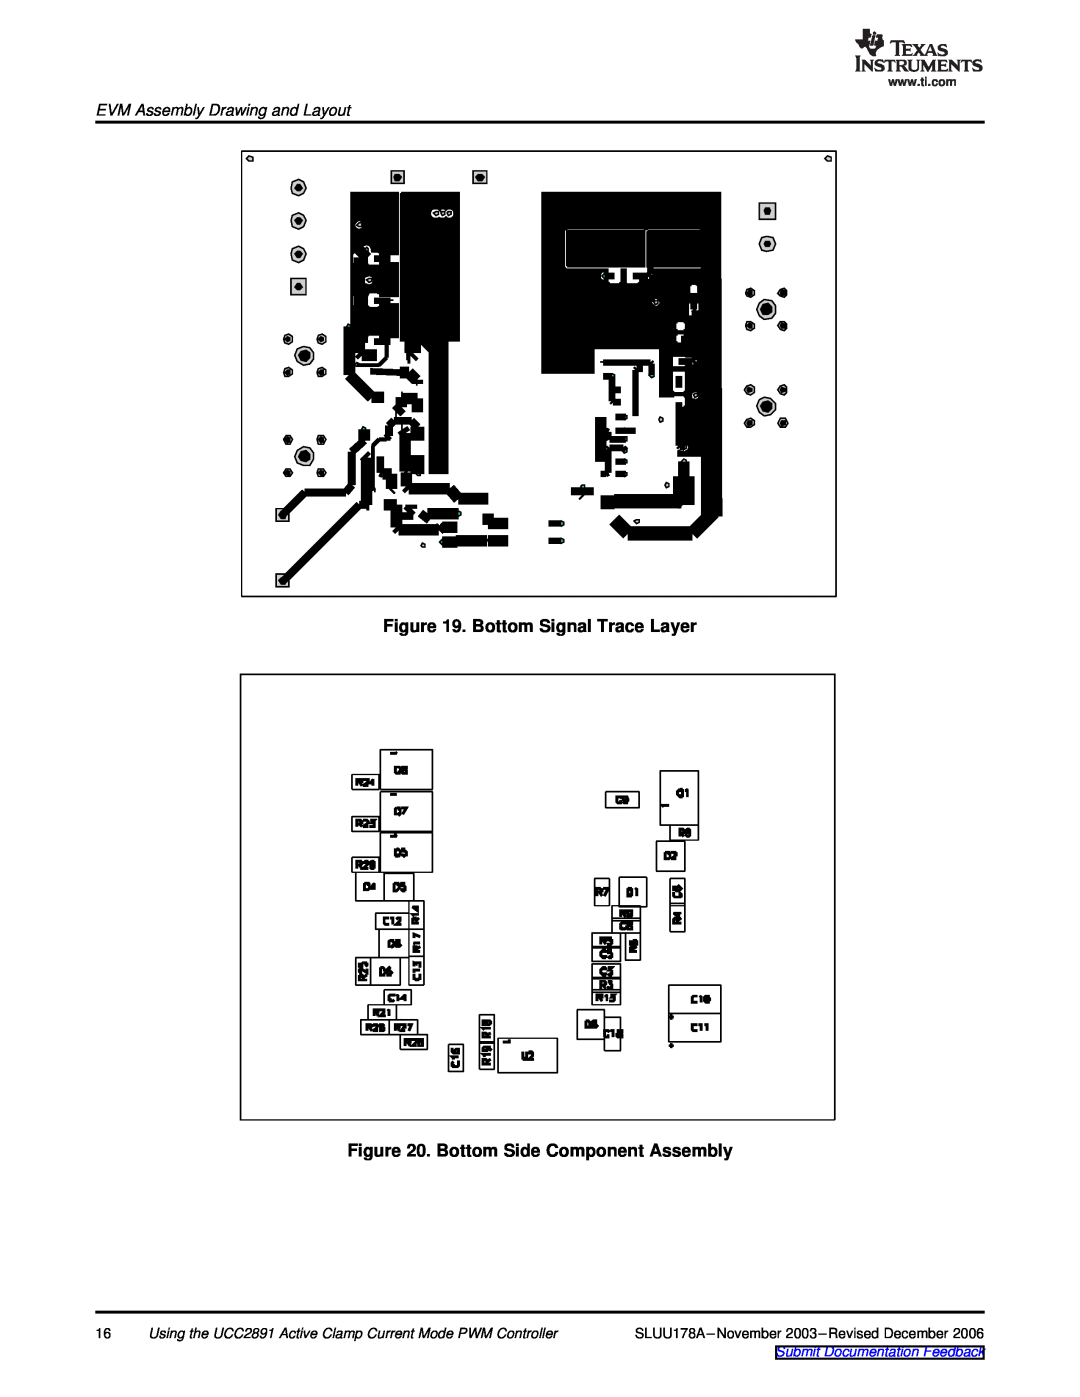 Texas Instruments UCC2891 manual Bottom Signal Trace Layer, Bottom Side Component Assembly, EVM Assembly Drawing and Layout 